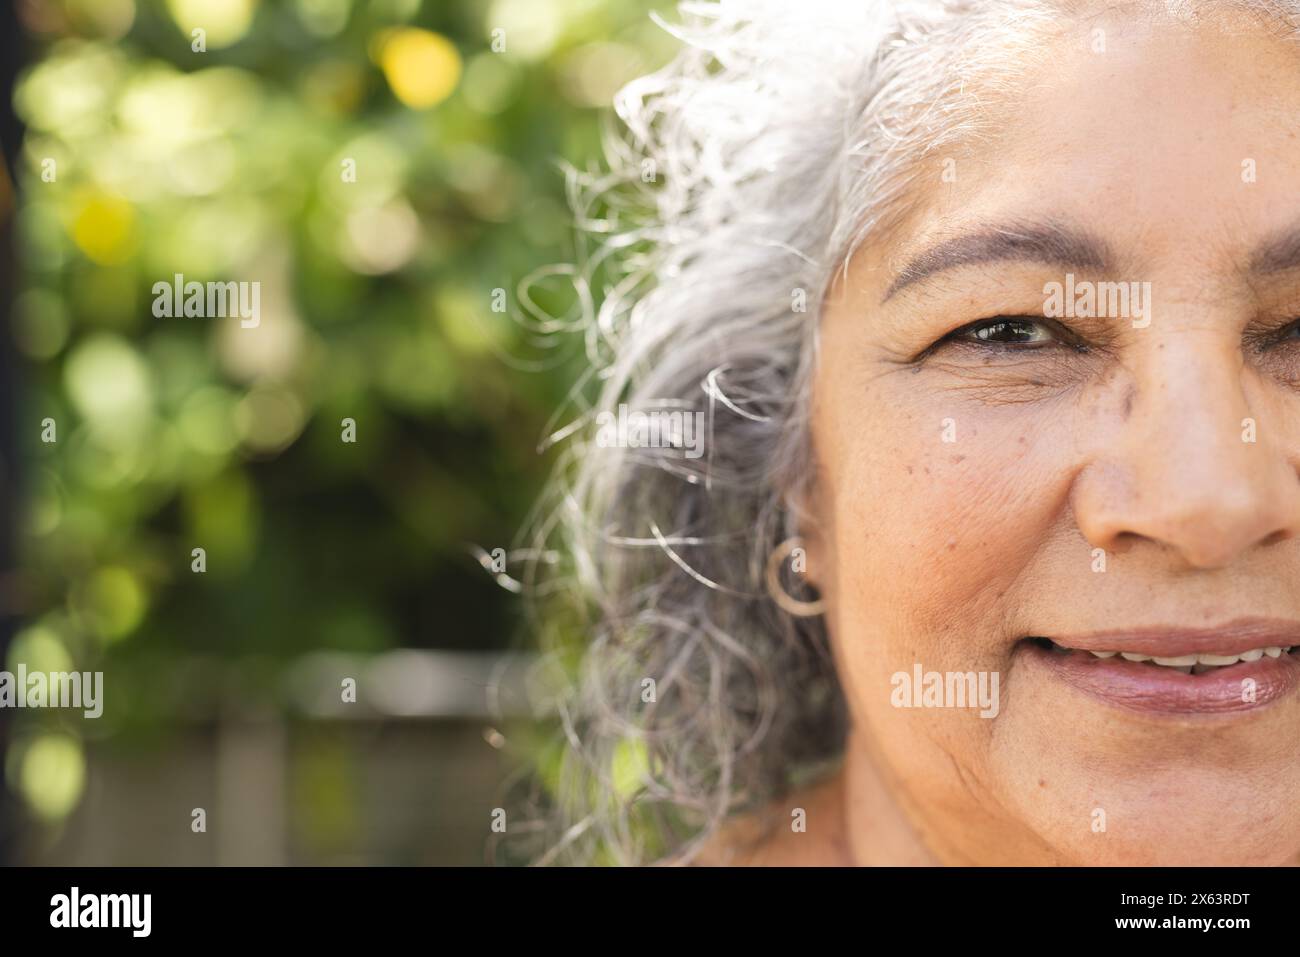 Outdoors, senior biracial woman with gray hair smiling, copy space Stock Photo